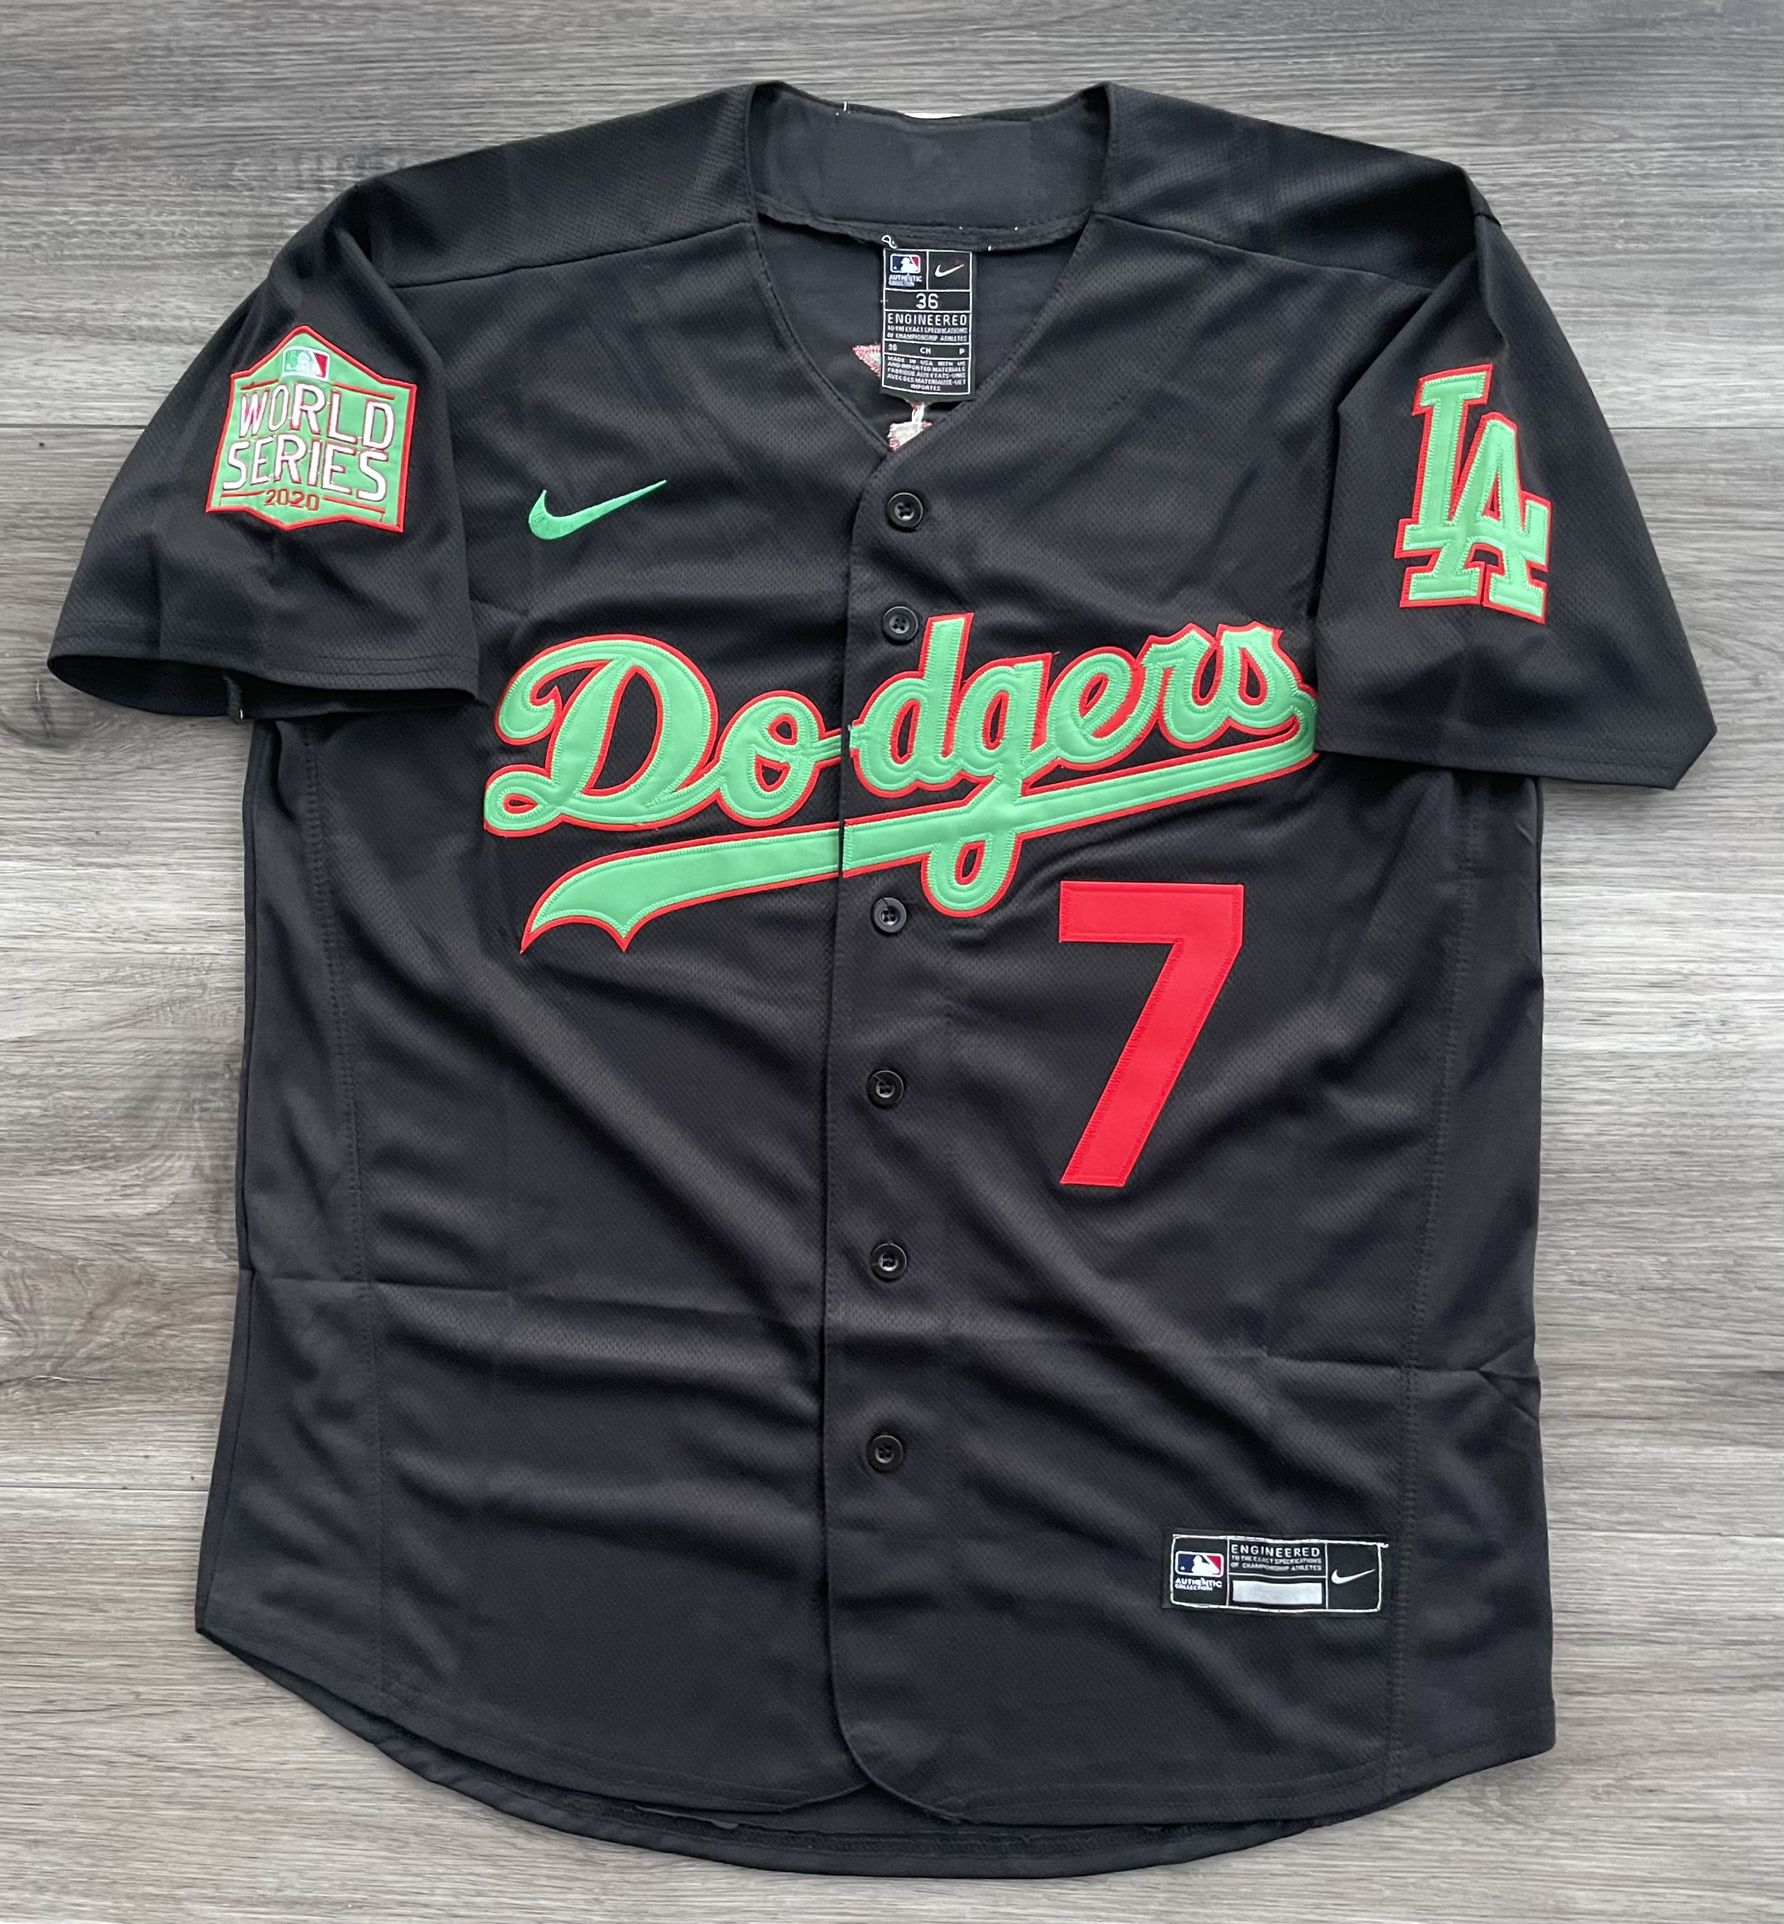 Dodgers Mexico Urias Jersey for Sale in Rancho Cucamonga, CA